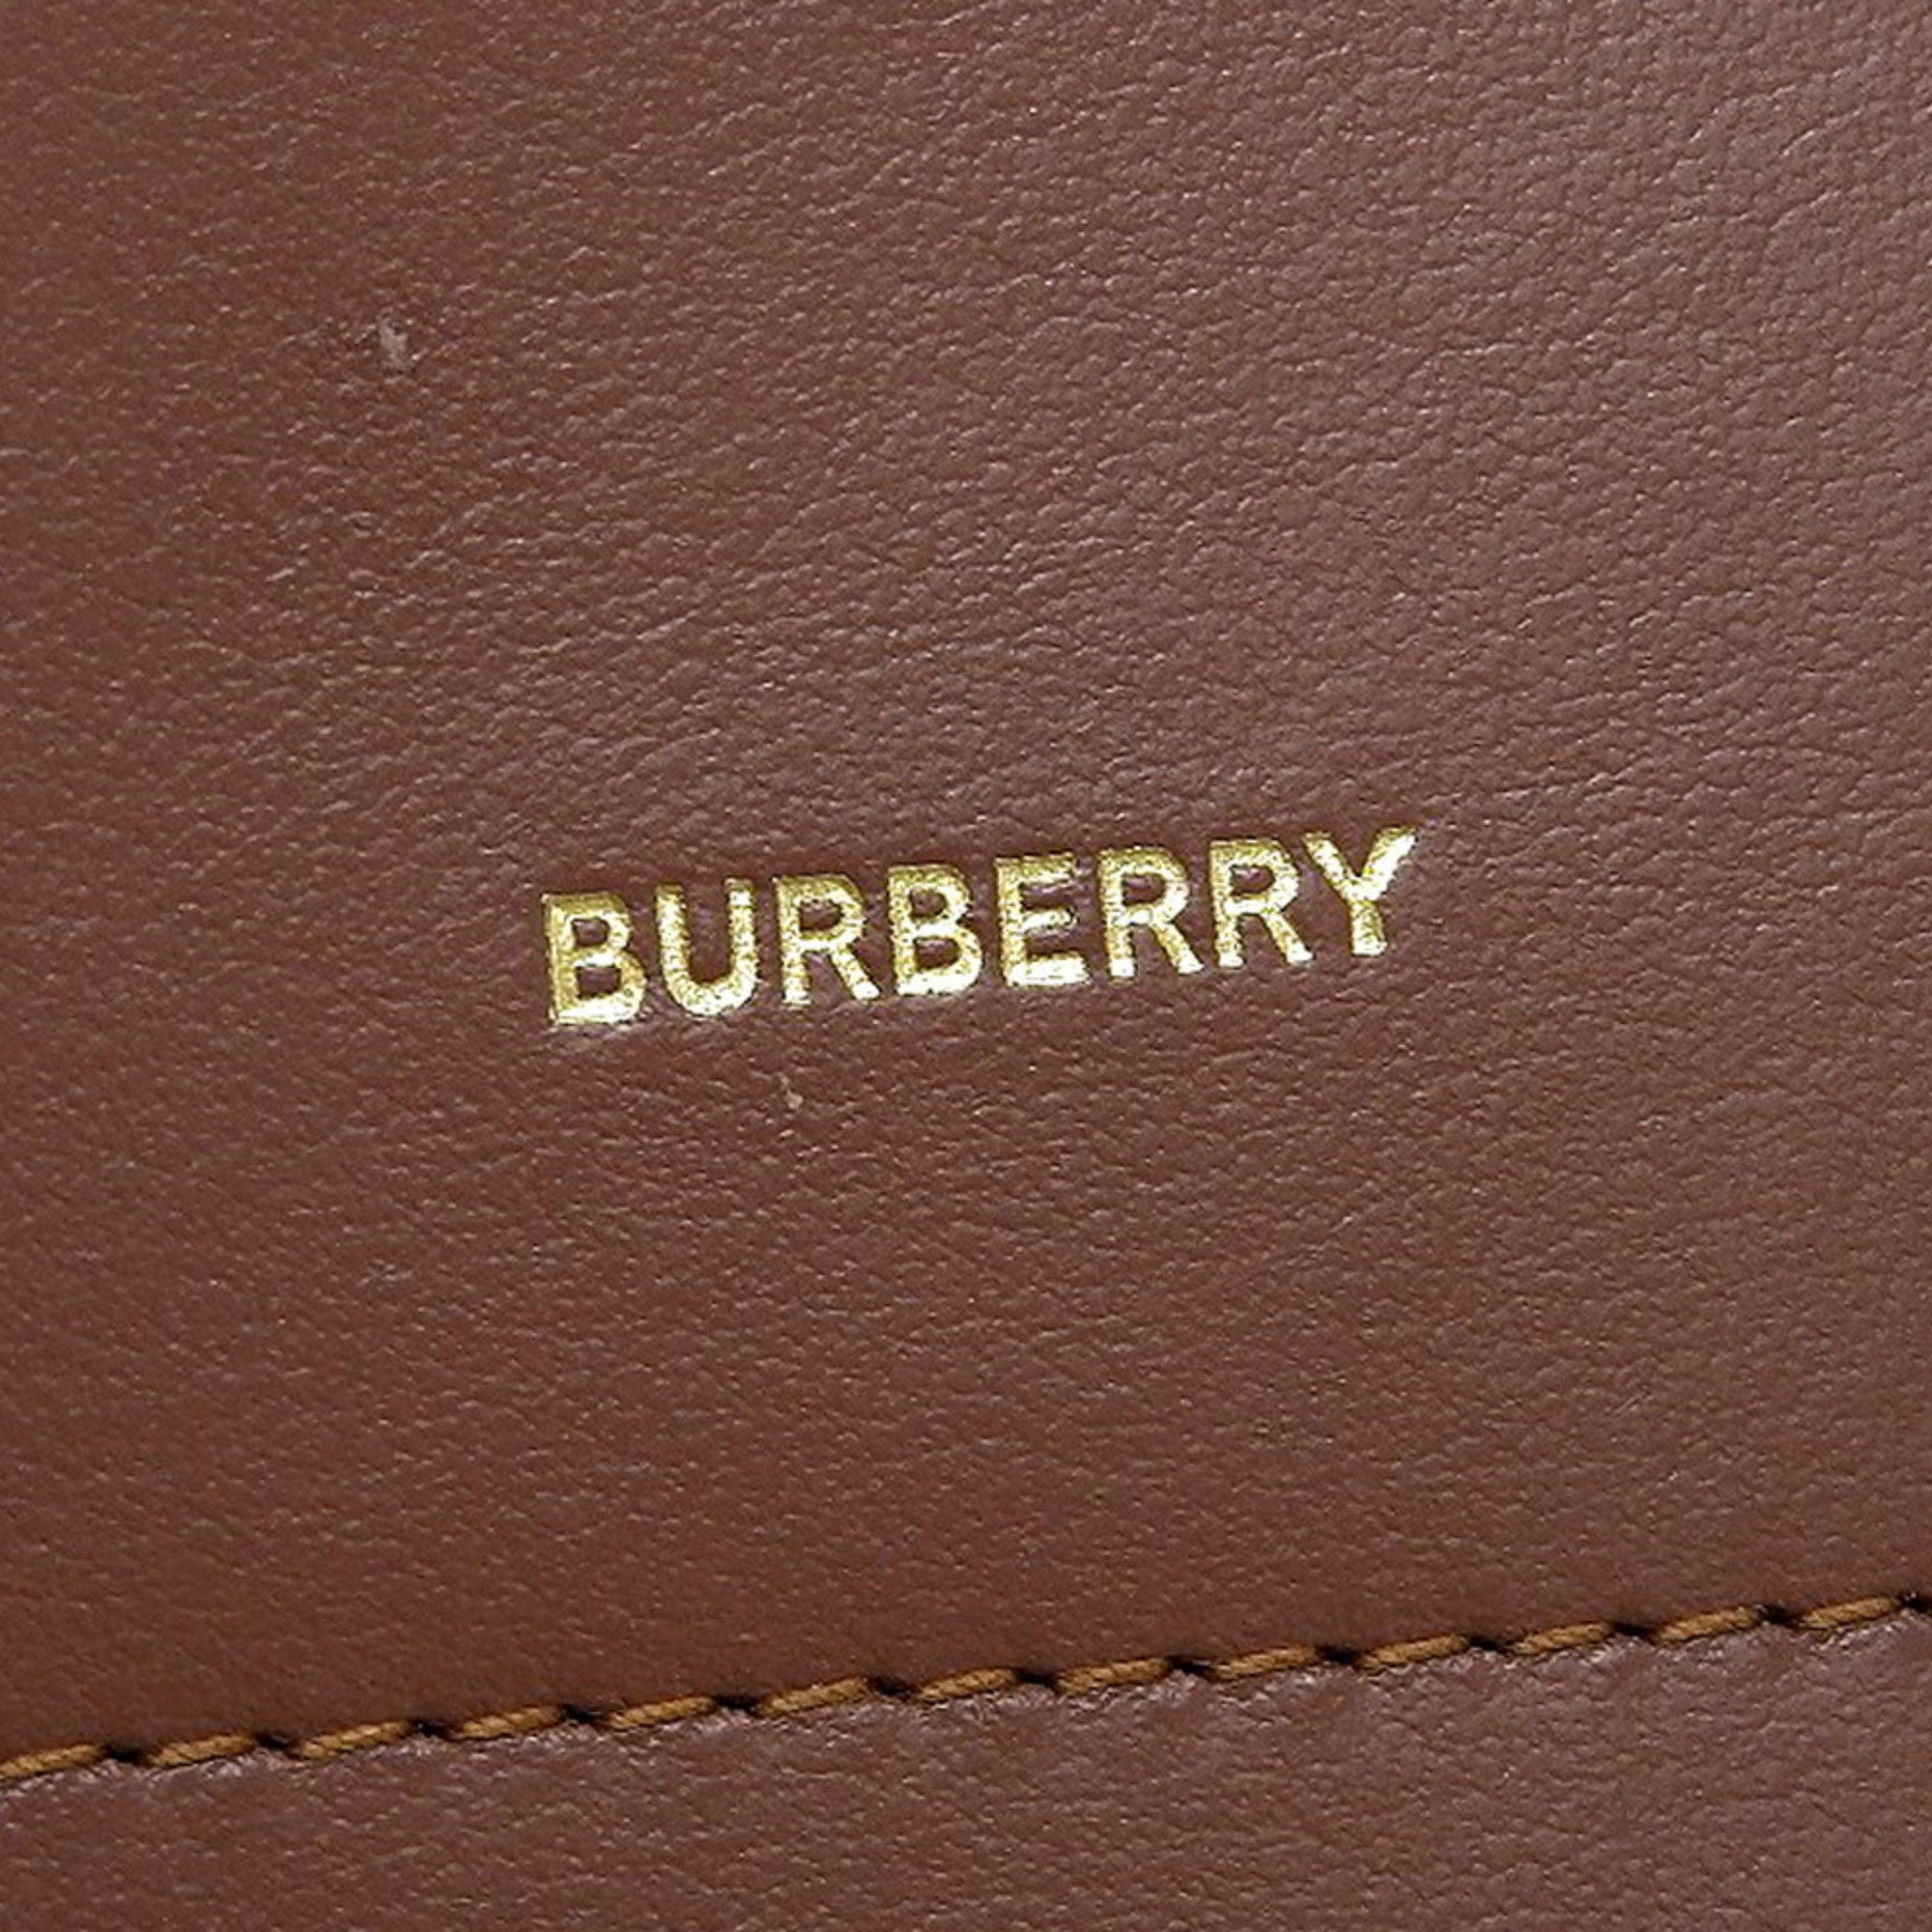 Burberry BURBERRY Striped Chain Wallet Shoulder Pouch Brown Black White